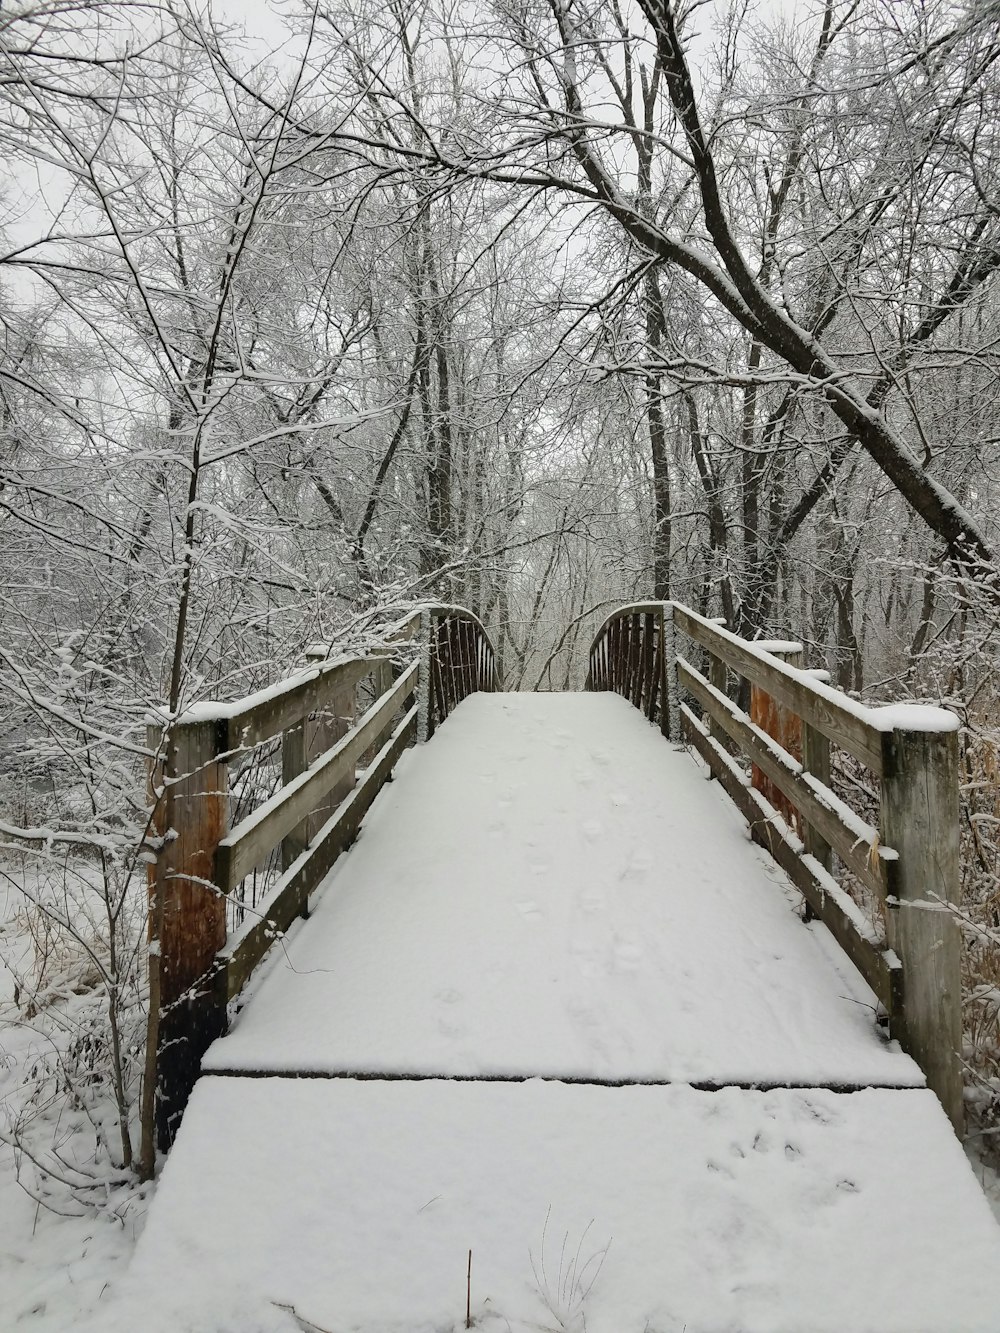 a wooden bridge in the middle of a snowy forest